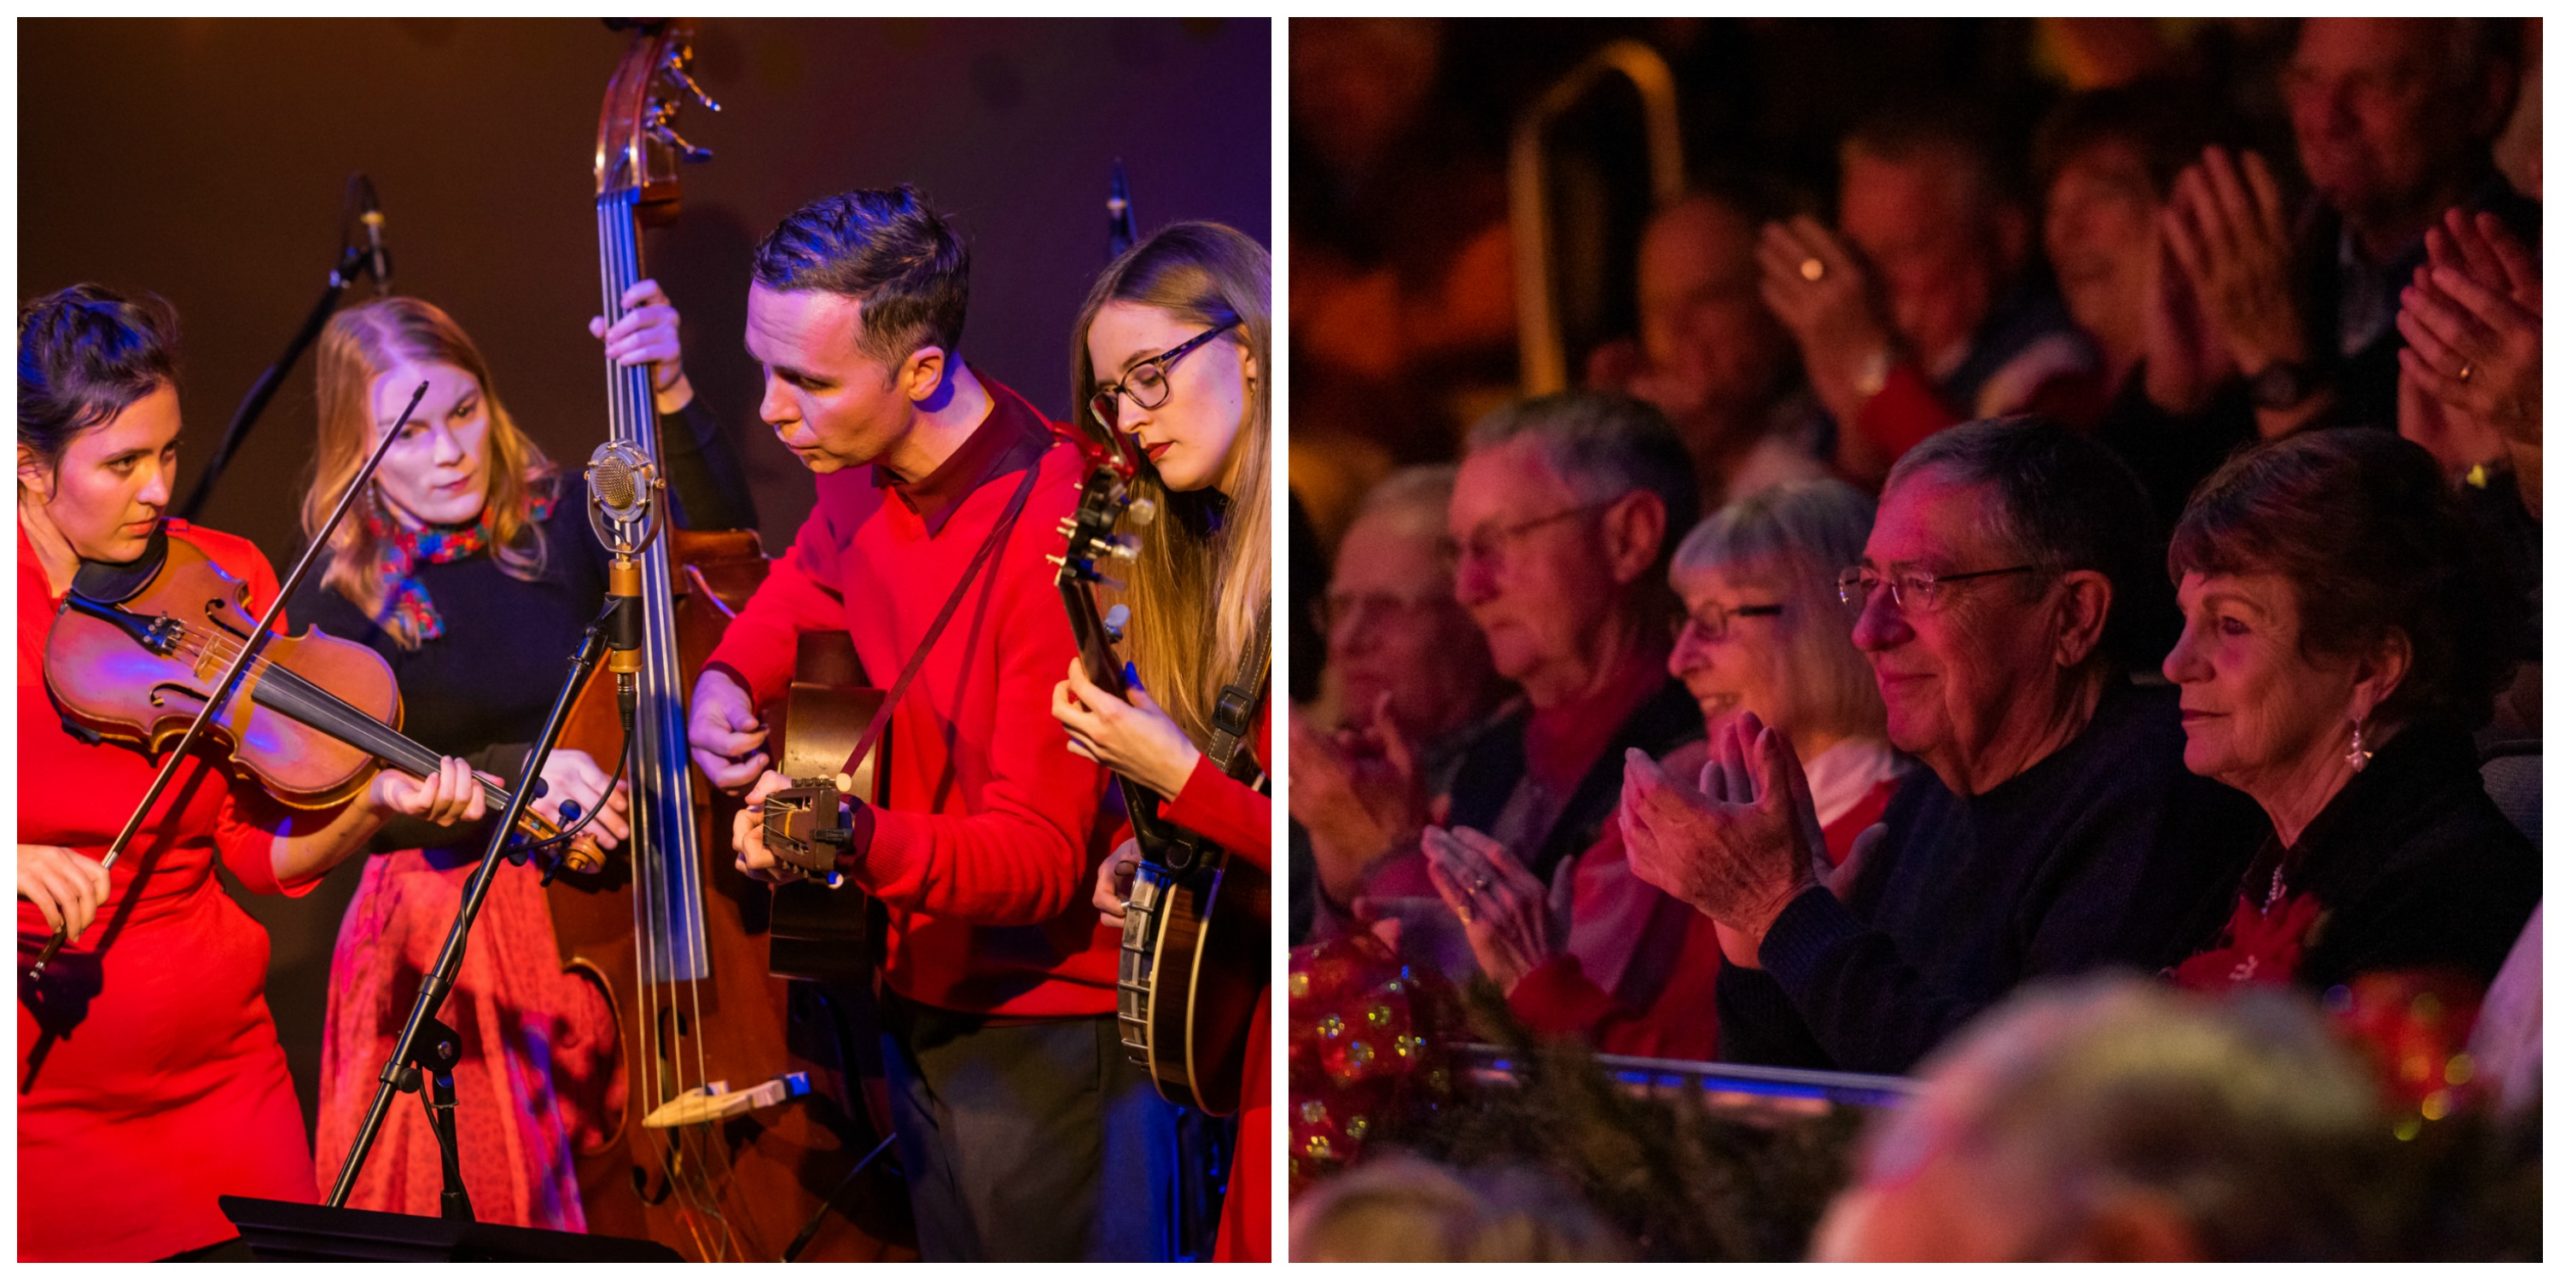 Left pic: The four musicians in Bill and the Belles all dressed in red lean into the microphones for their first number; right pic: The audience shows their appreciation for the show, focused in on several audience members clapping. 